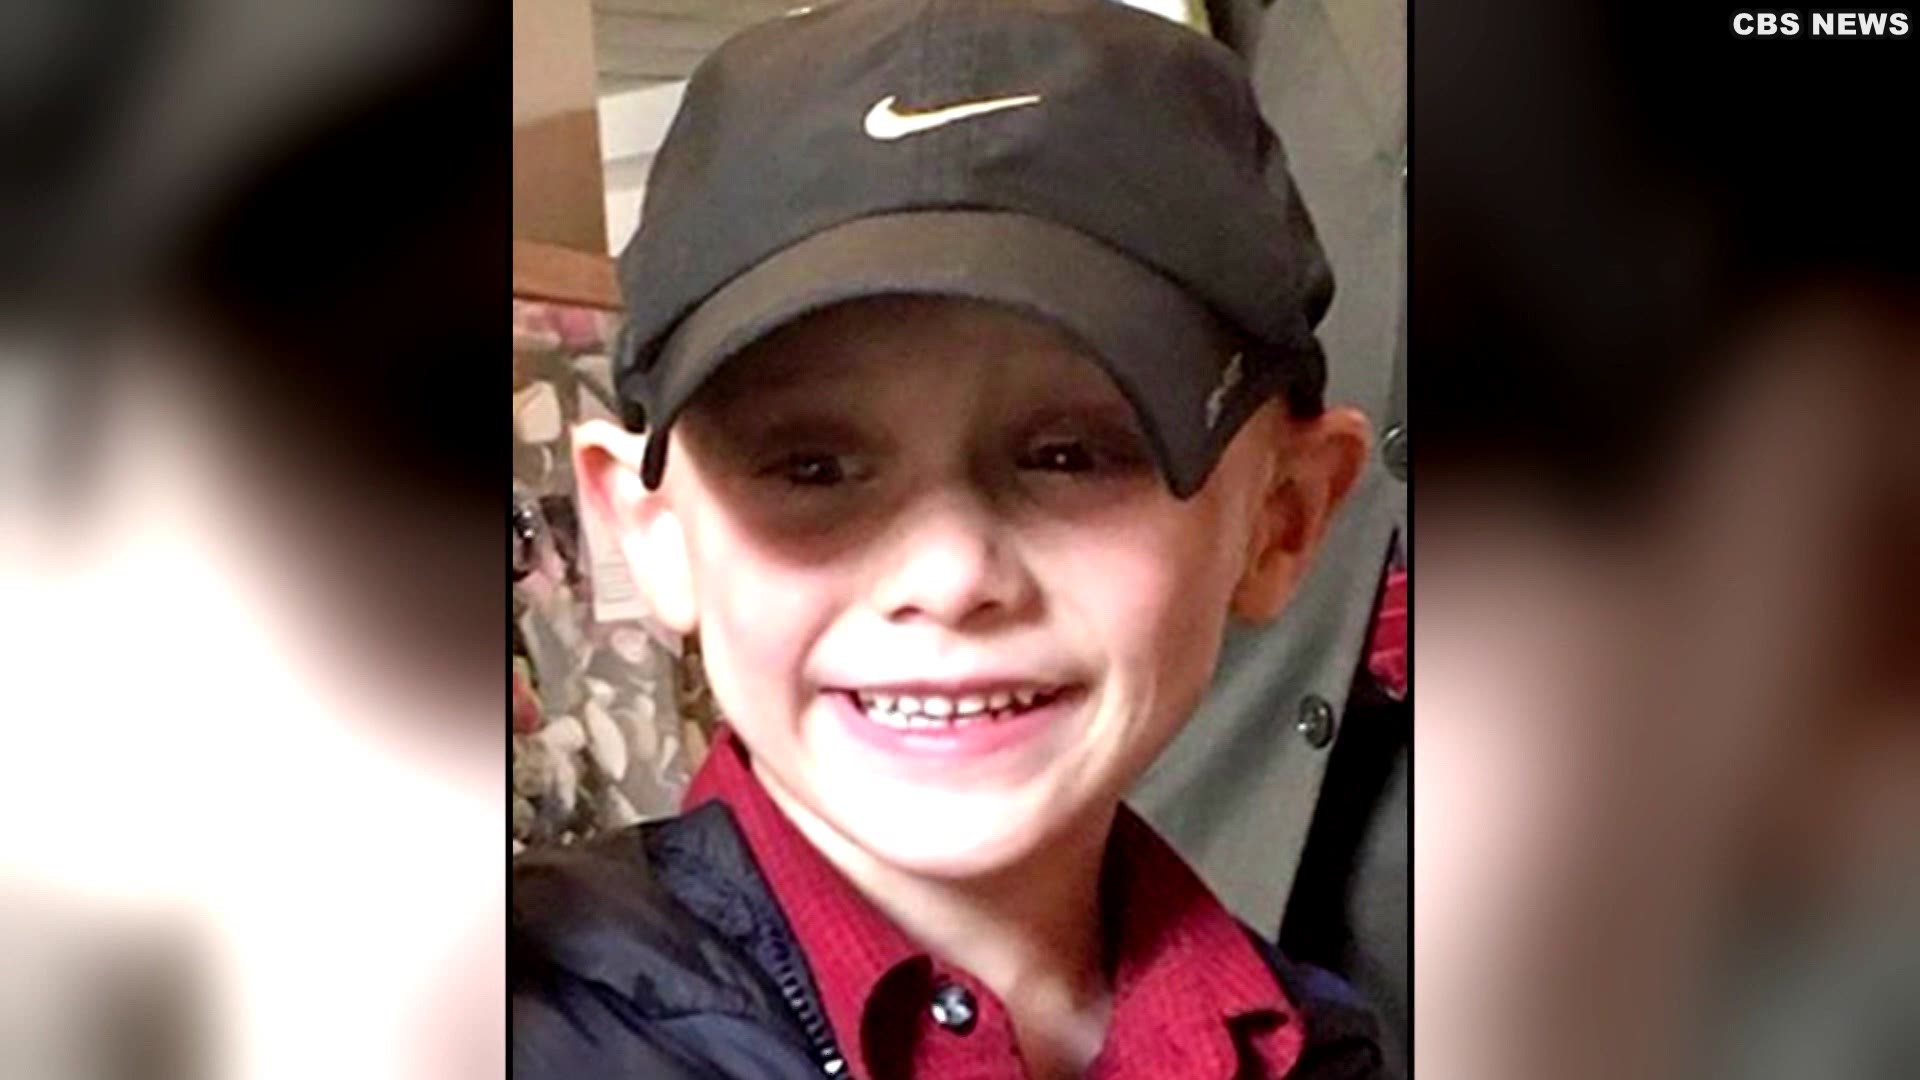 Investigators in Crystal Lake, Illinois are focusing their search on the family's home where five-year-old "AJ" Freund allegedly went missing on Wednesday.